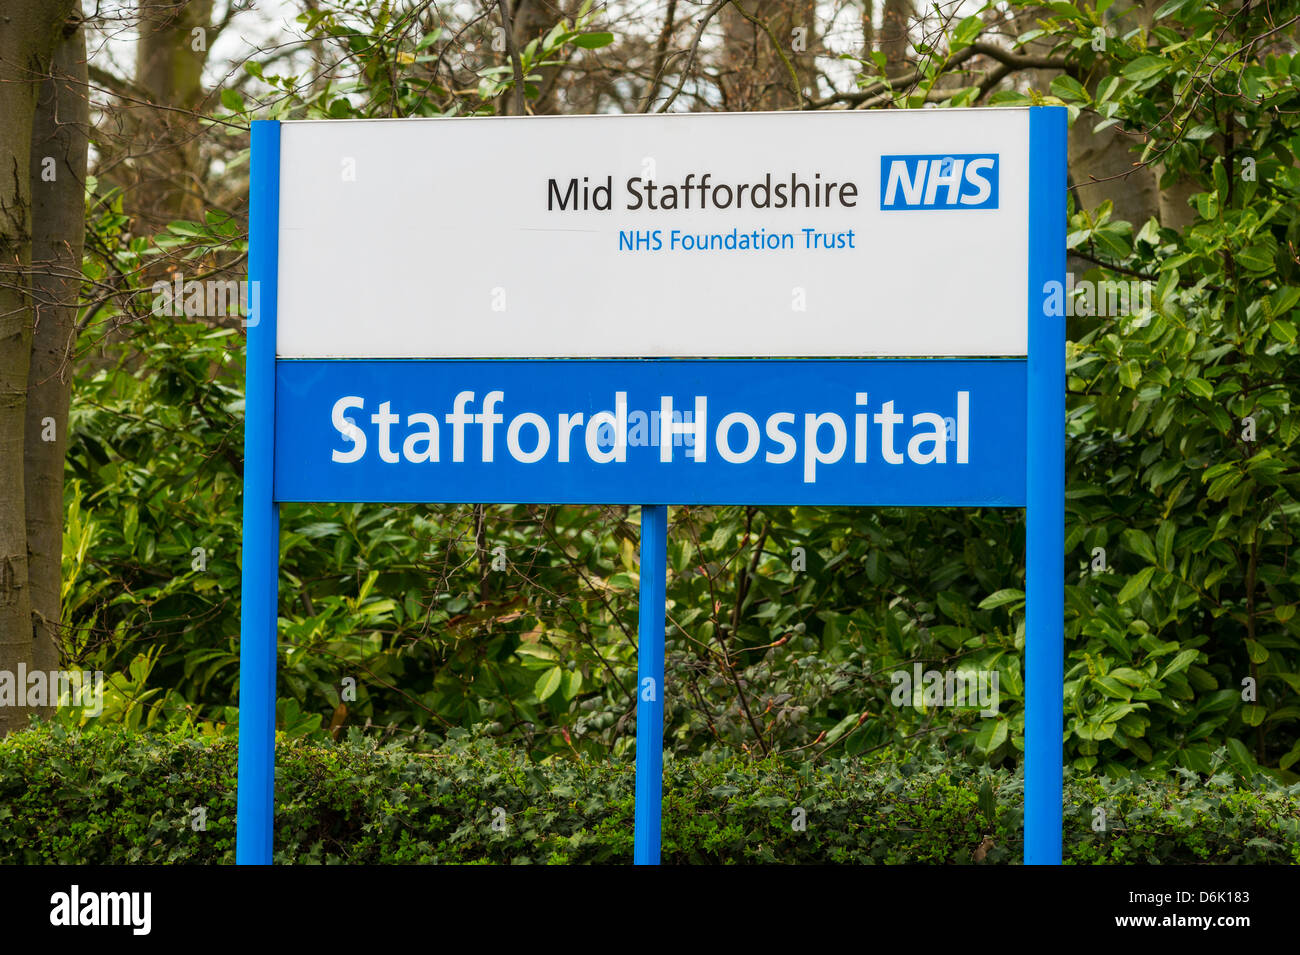 Stafford Hospital Signs, Mid Staffordshire NHS Foundation Trust under investigation due to high mortality rates. Stock Photo